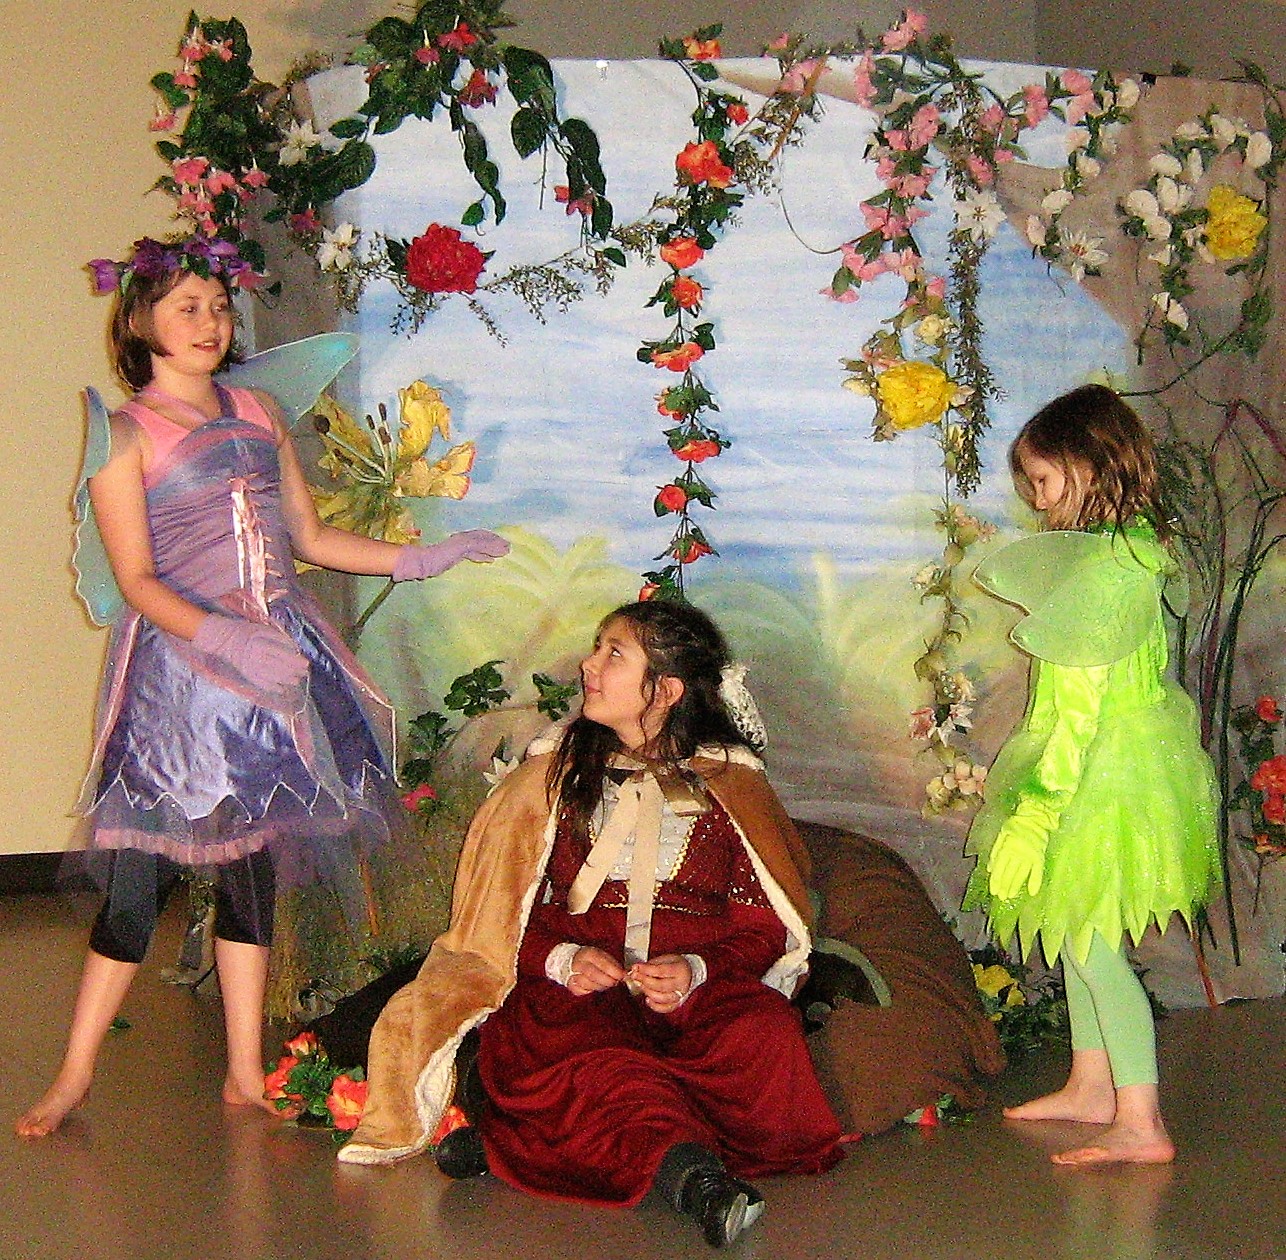 Image performers - Winter Drama Classes for Kids ages 7-12 - Theatre A Go-Go